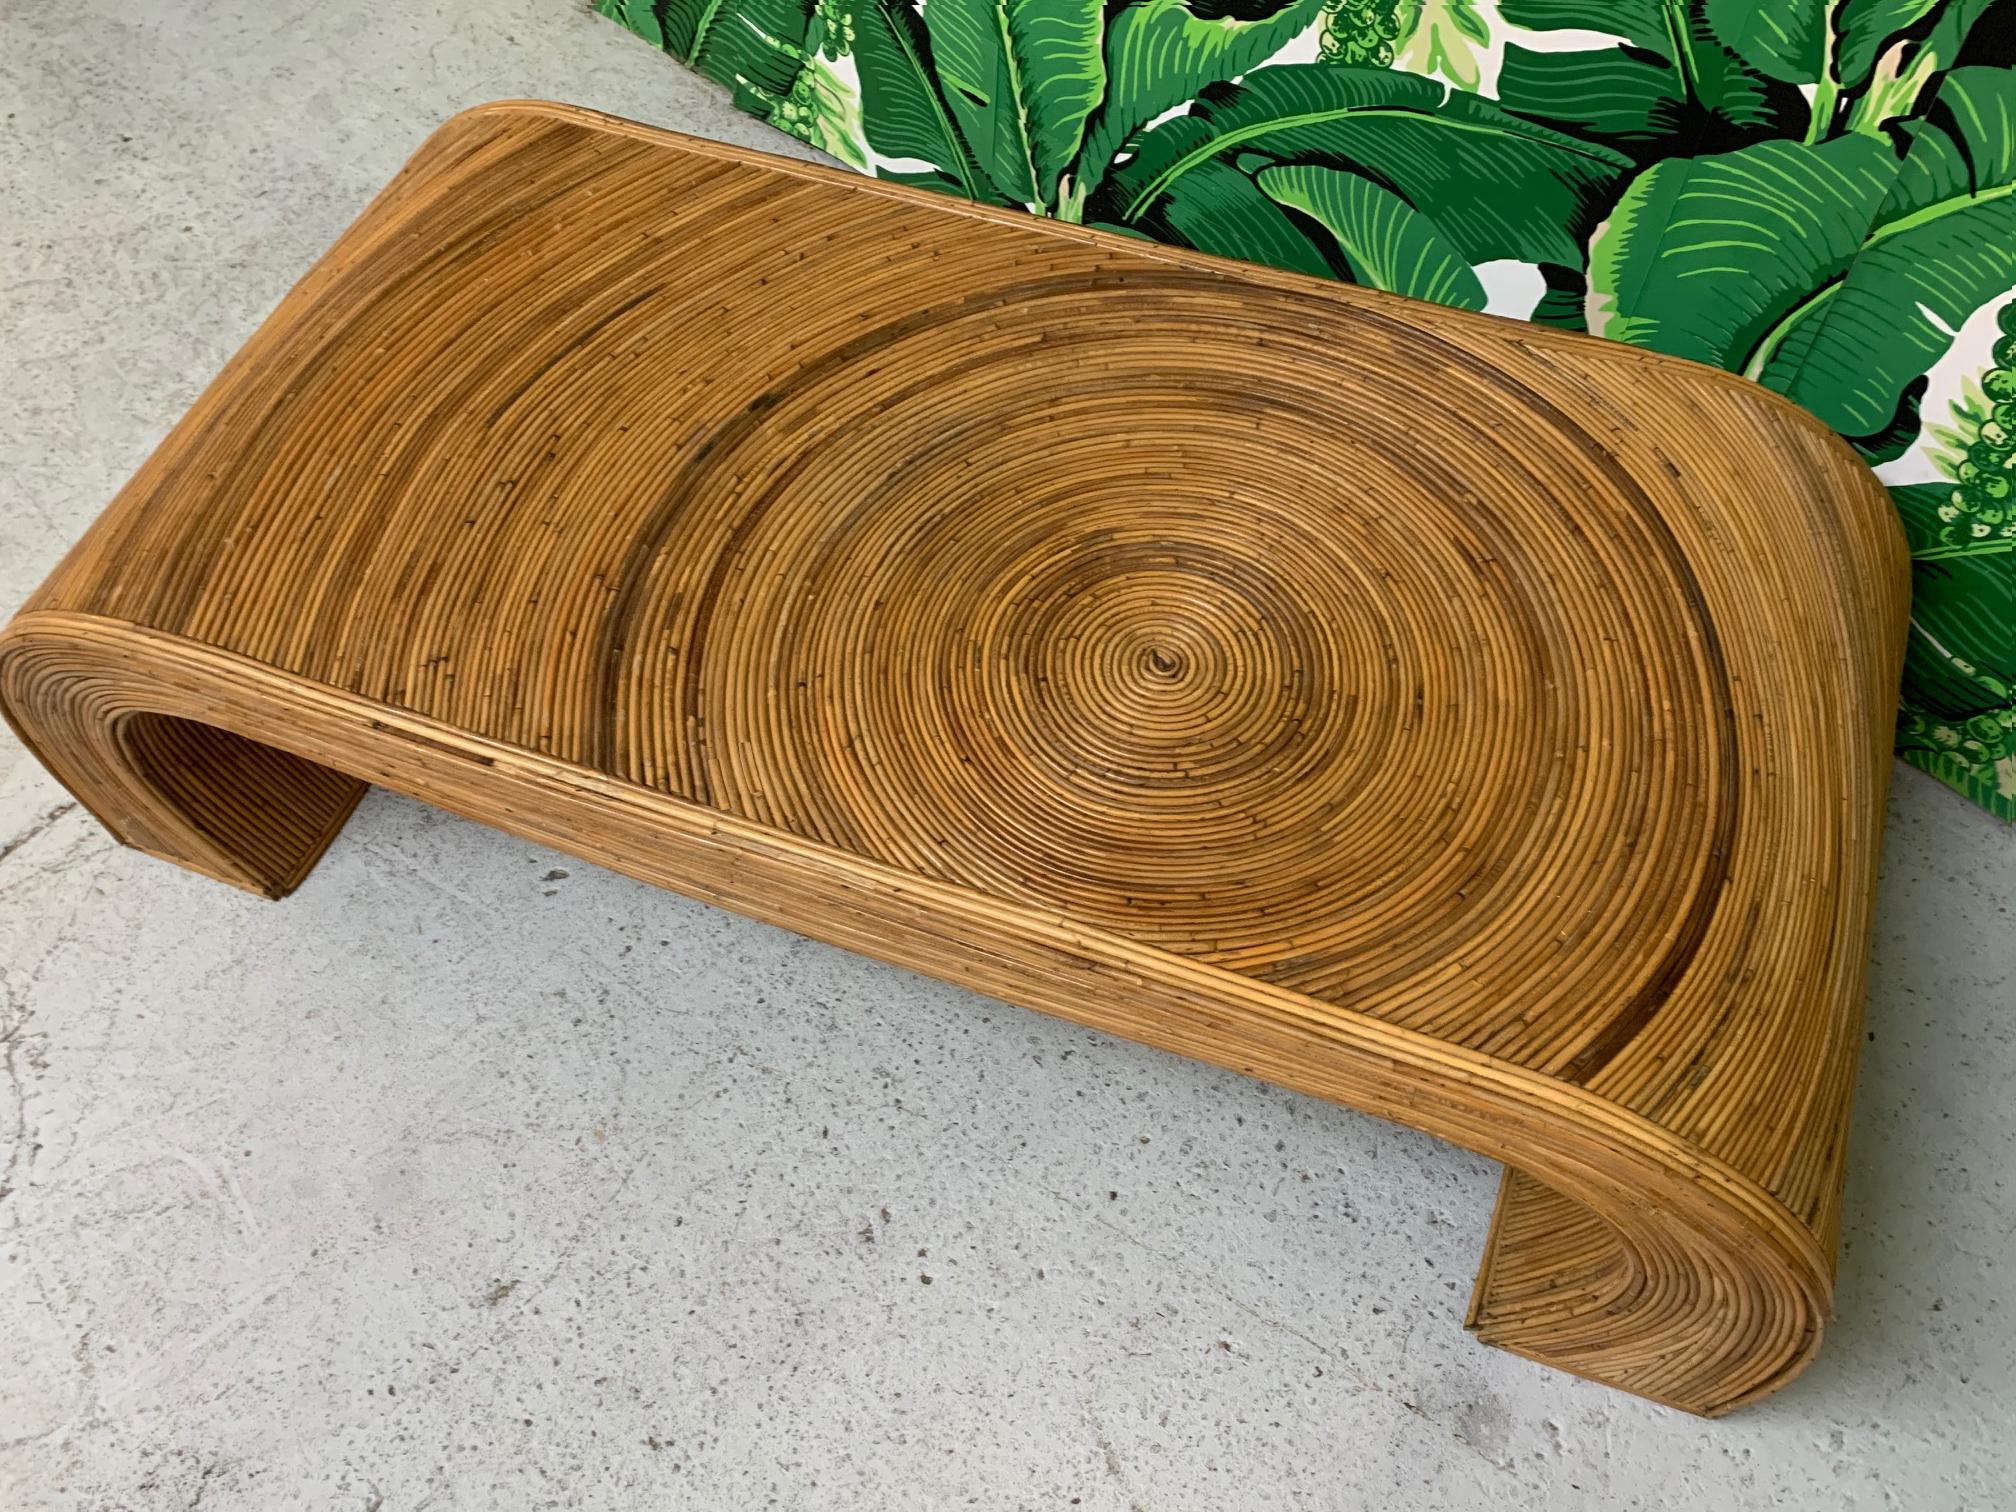 Waterfall coffee table features a complete veneer of pencil reed rattan in the style of Gabriella Crespi. Good vintage condition with minor imperfections consistent with age.